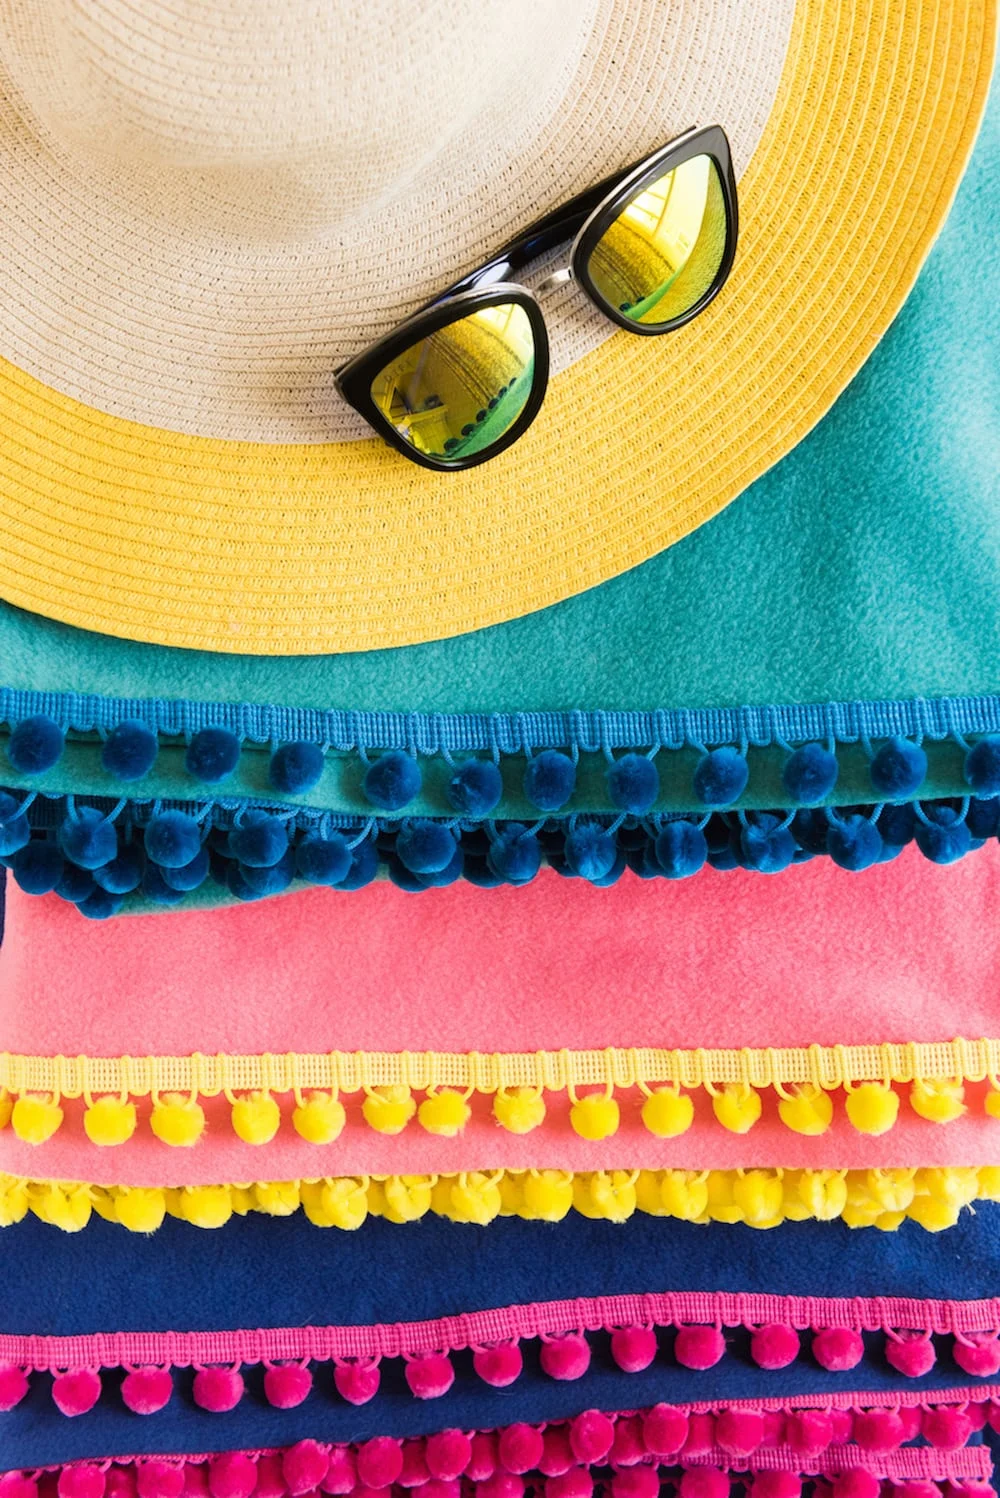 How to make a no-sew blanket! Find the tutorial for these colorful pom pom picnic blankets from @cydconverse! | Click through for more fun summer ideas, entertaining tips, party ideas, recipes, crafts and more!